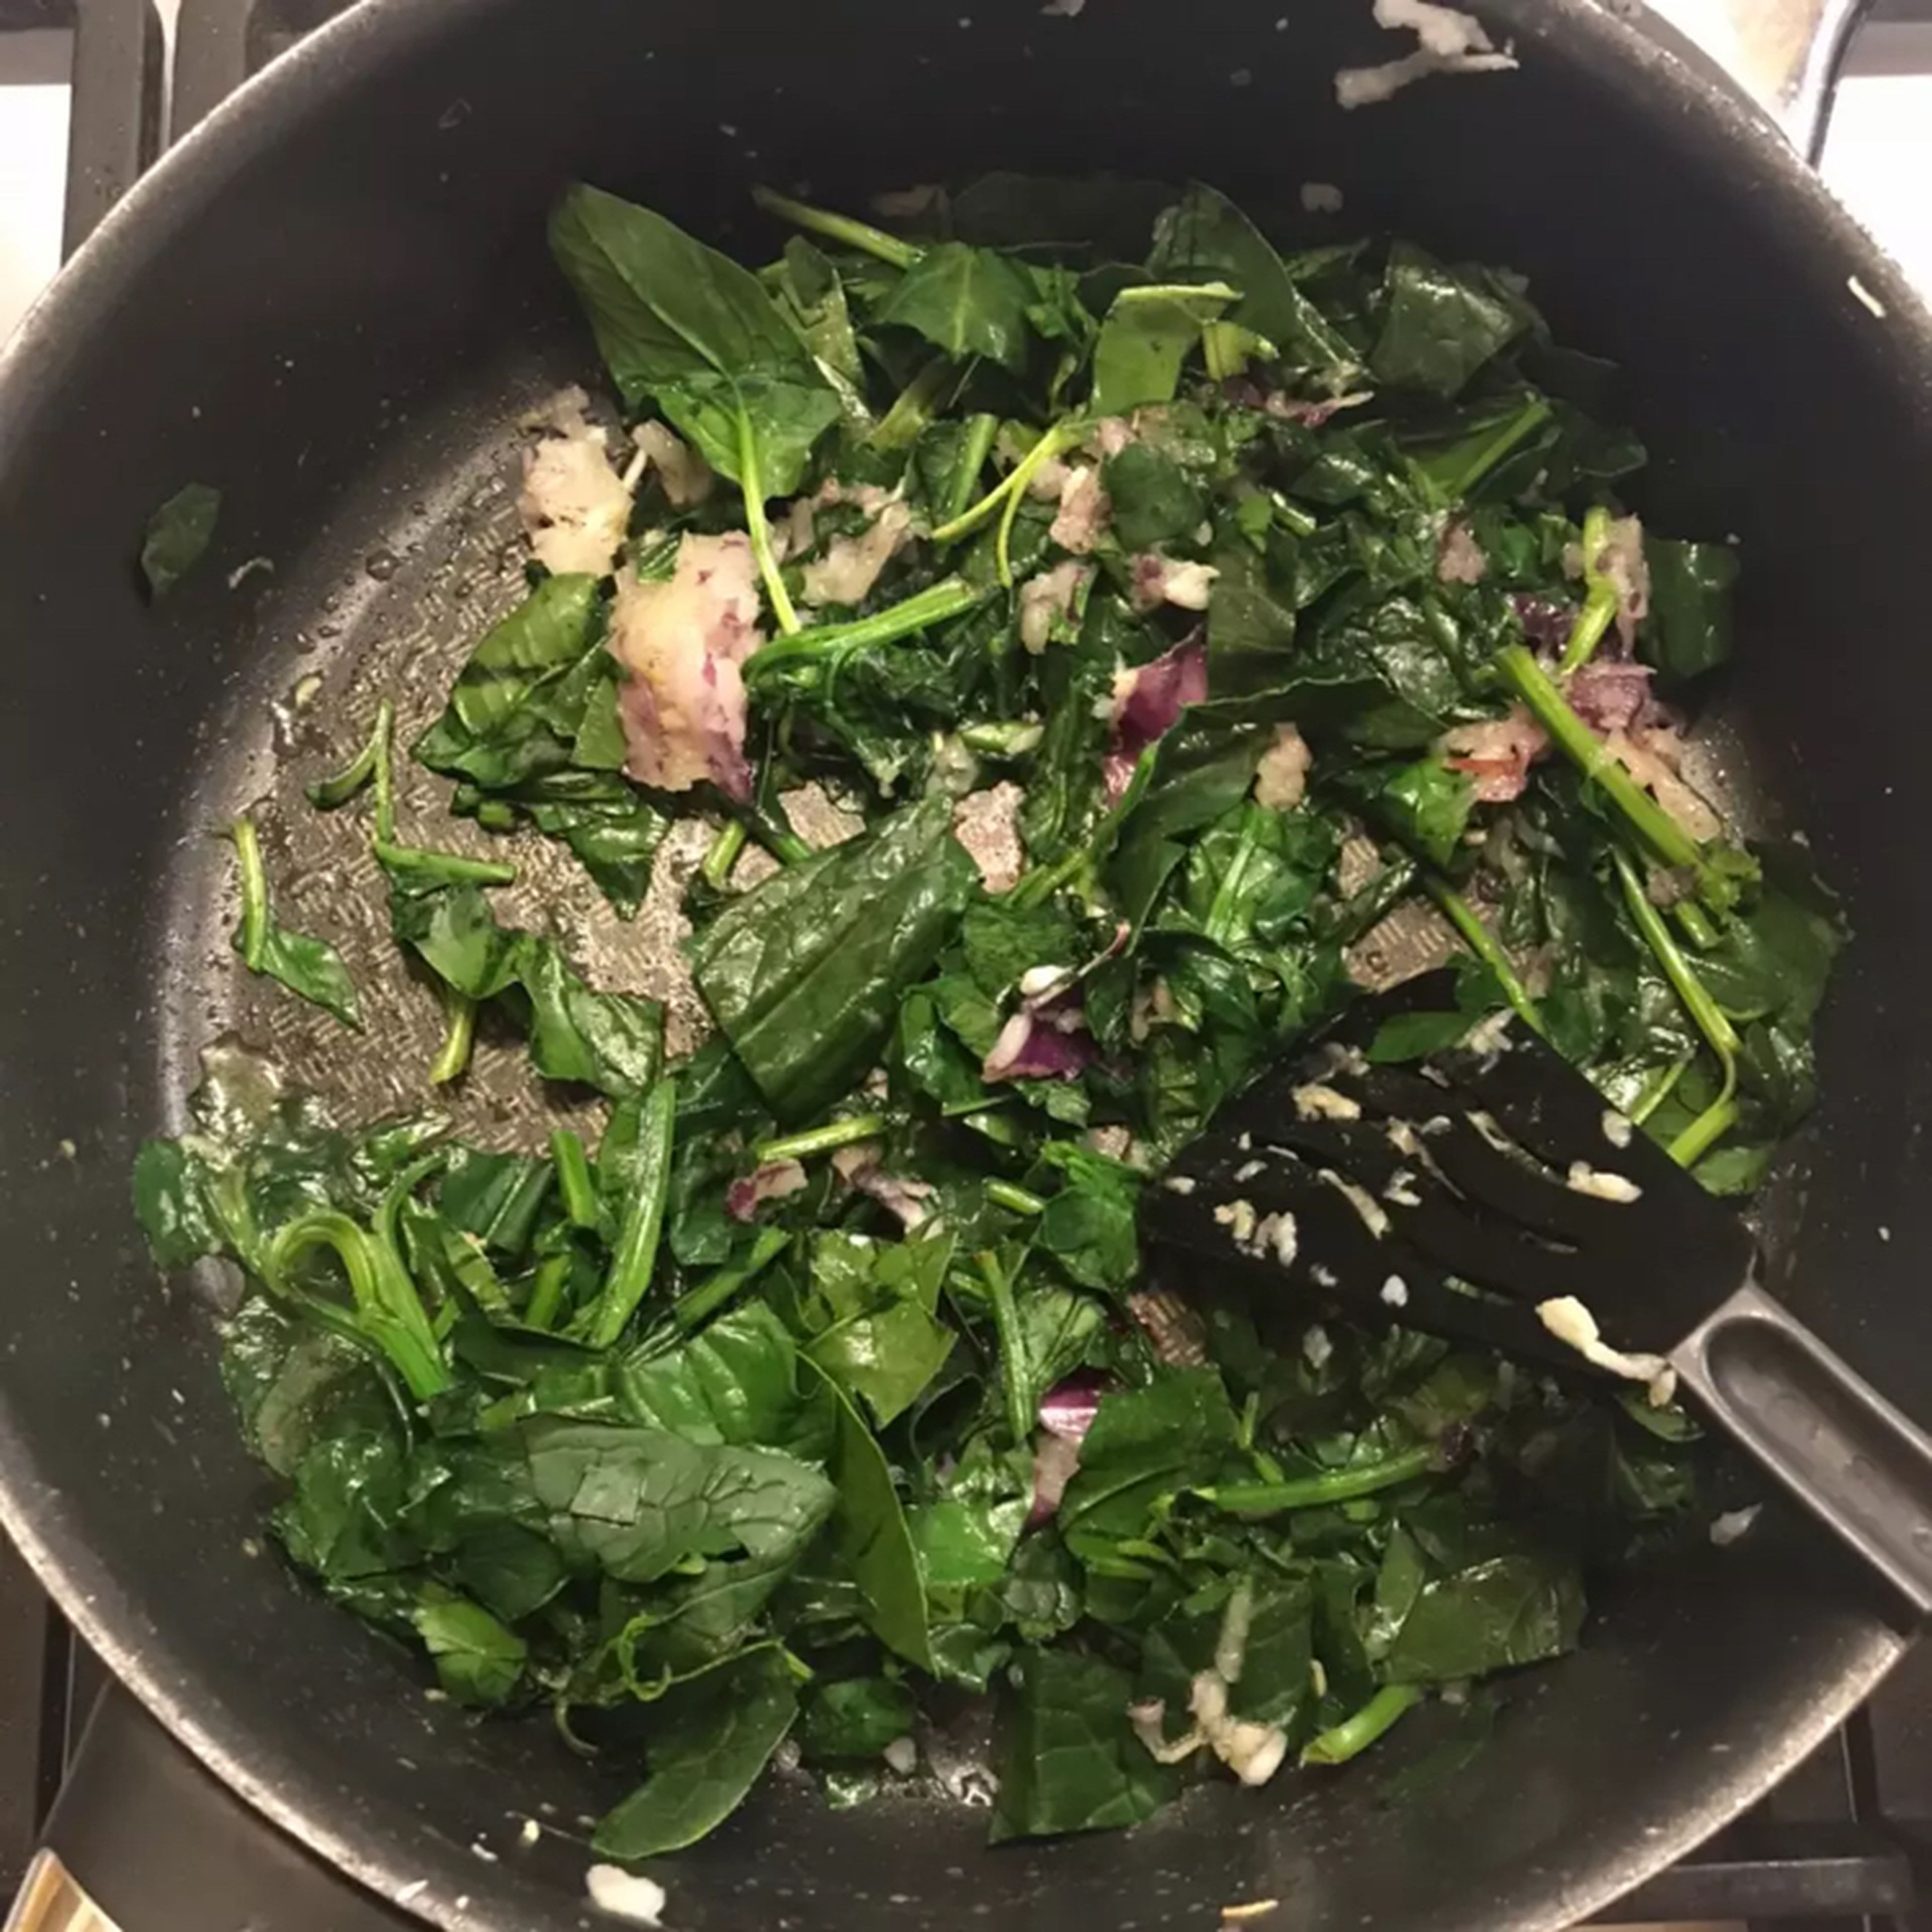 Put the chopped spinach and onion in the same pan and fry until the onion is soft.